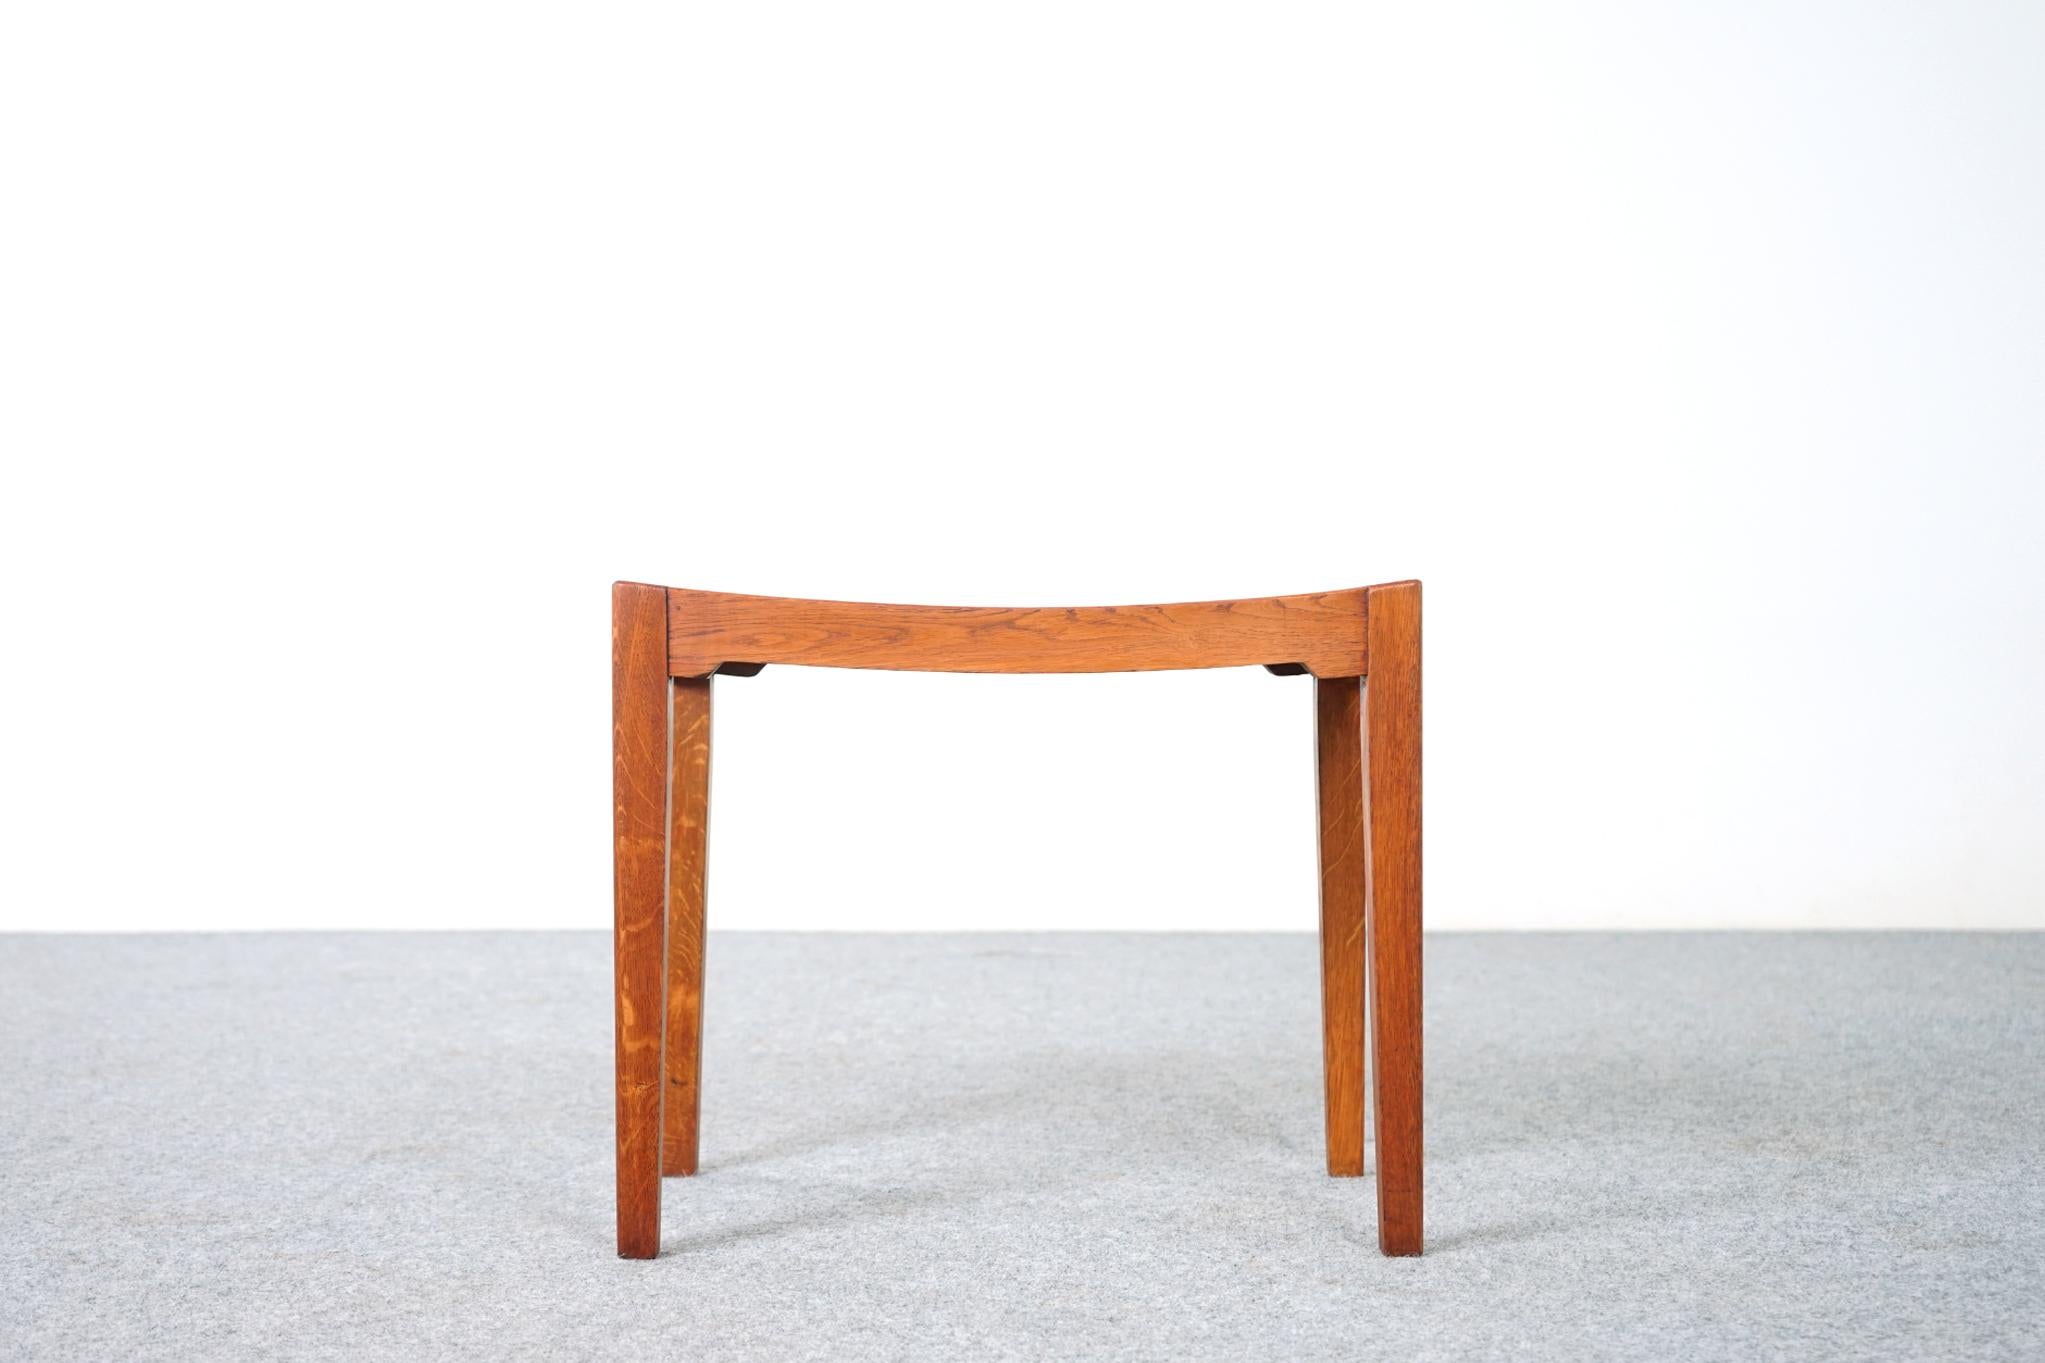 Oak Danish arched stool / side table, circa 1960's. Compact design can be used with virtually any seating type, easy to move around the home. Nice minimal footprint, pop it by your front door, ideal shoe tying bench or sweet side table. Versatile,